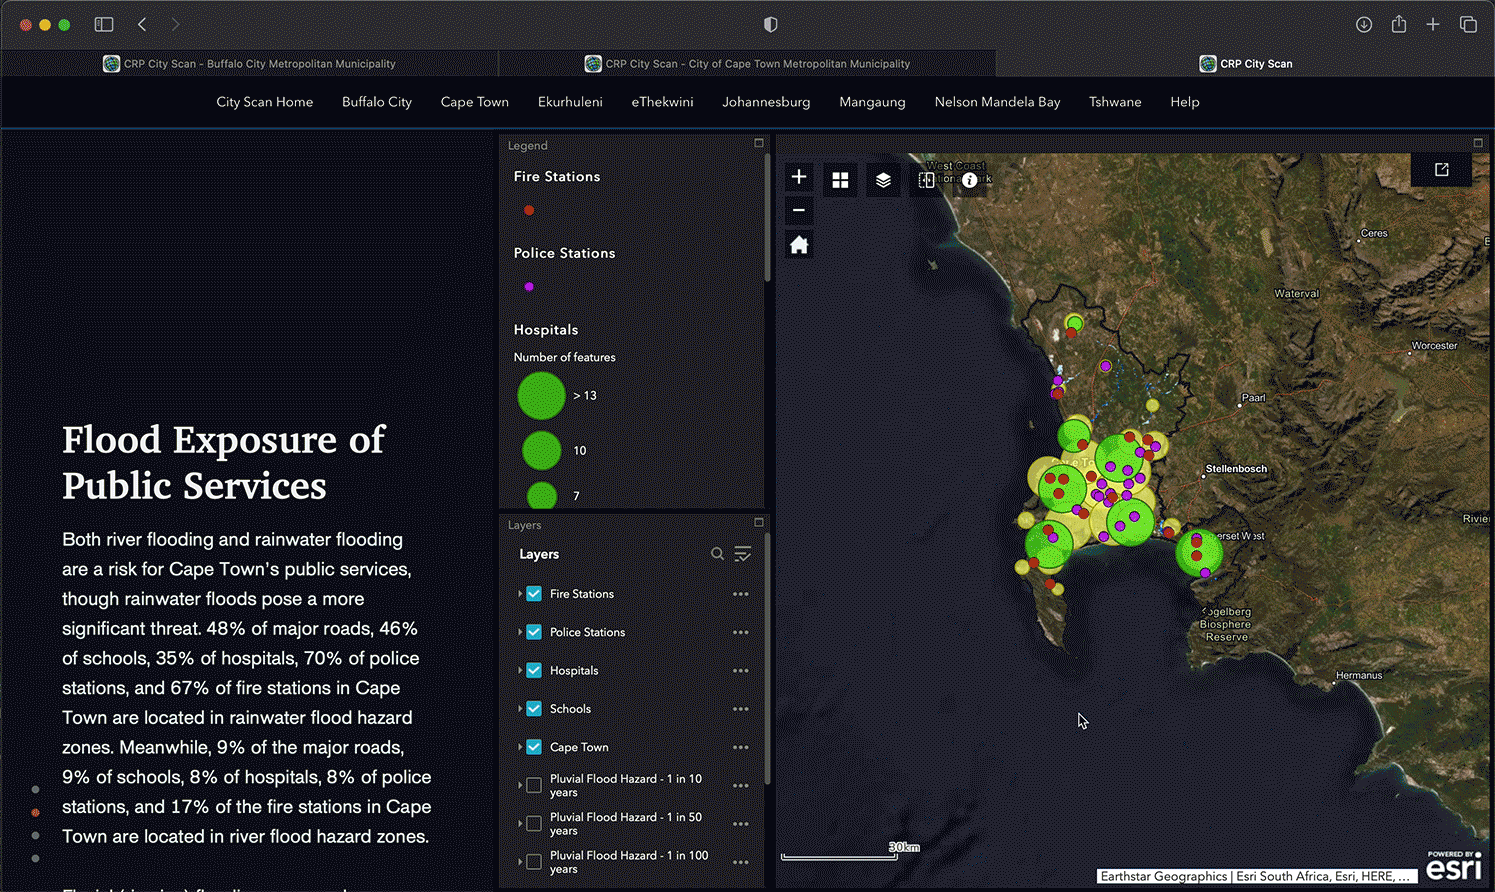 Interactive visualization of flood exposure of public services.